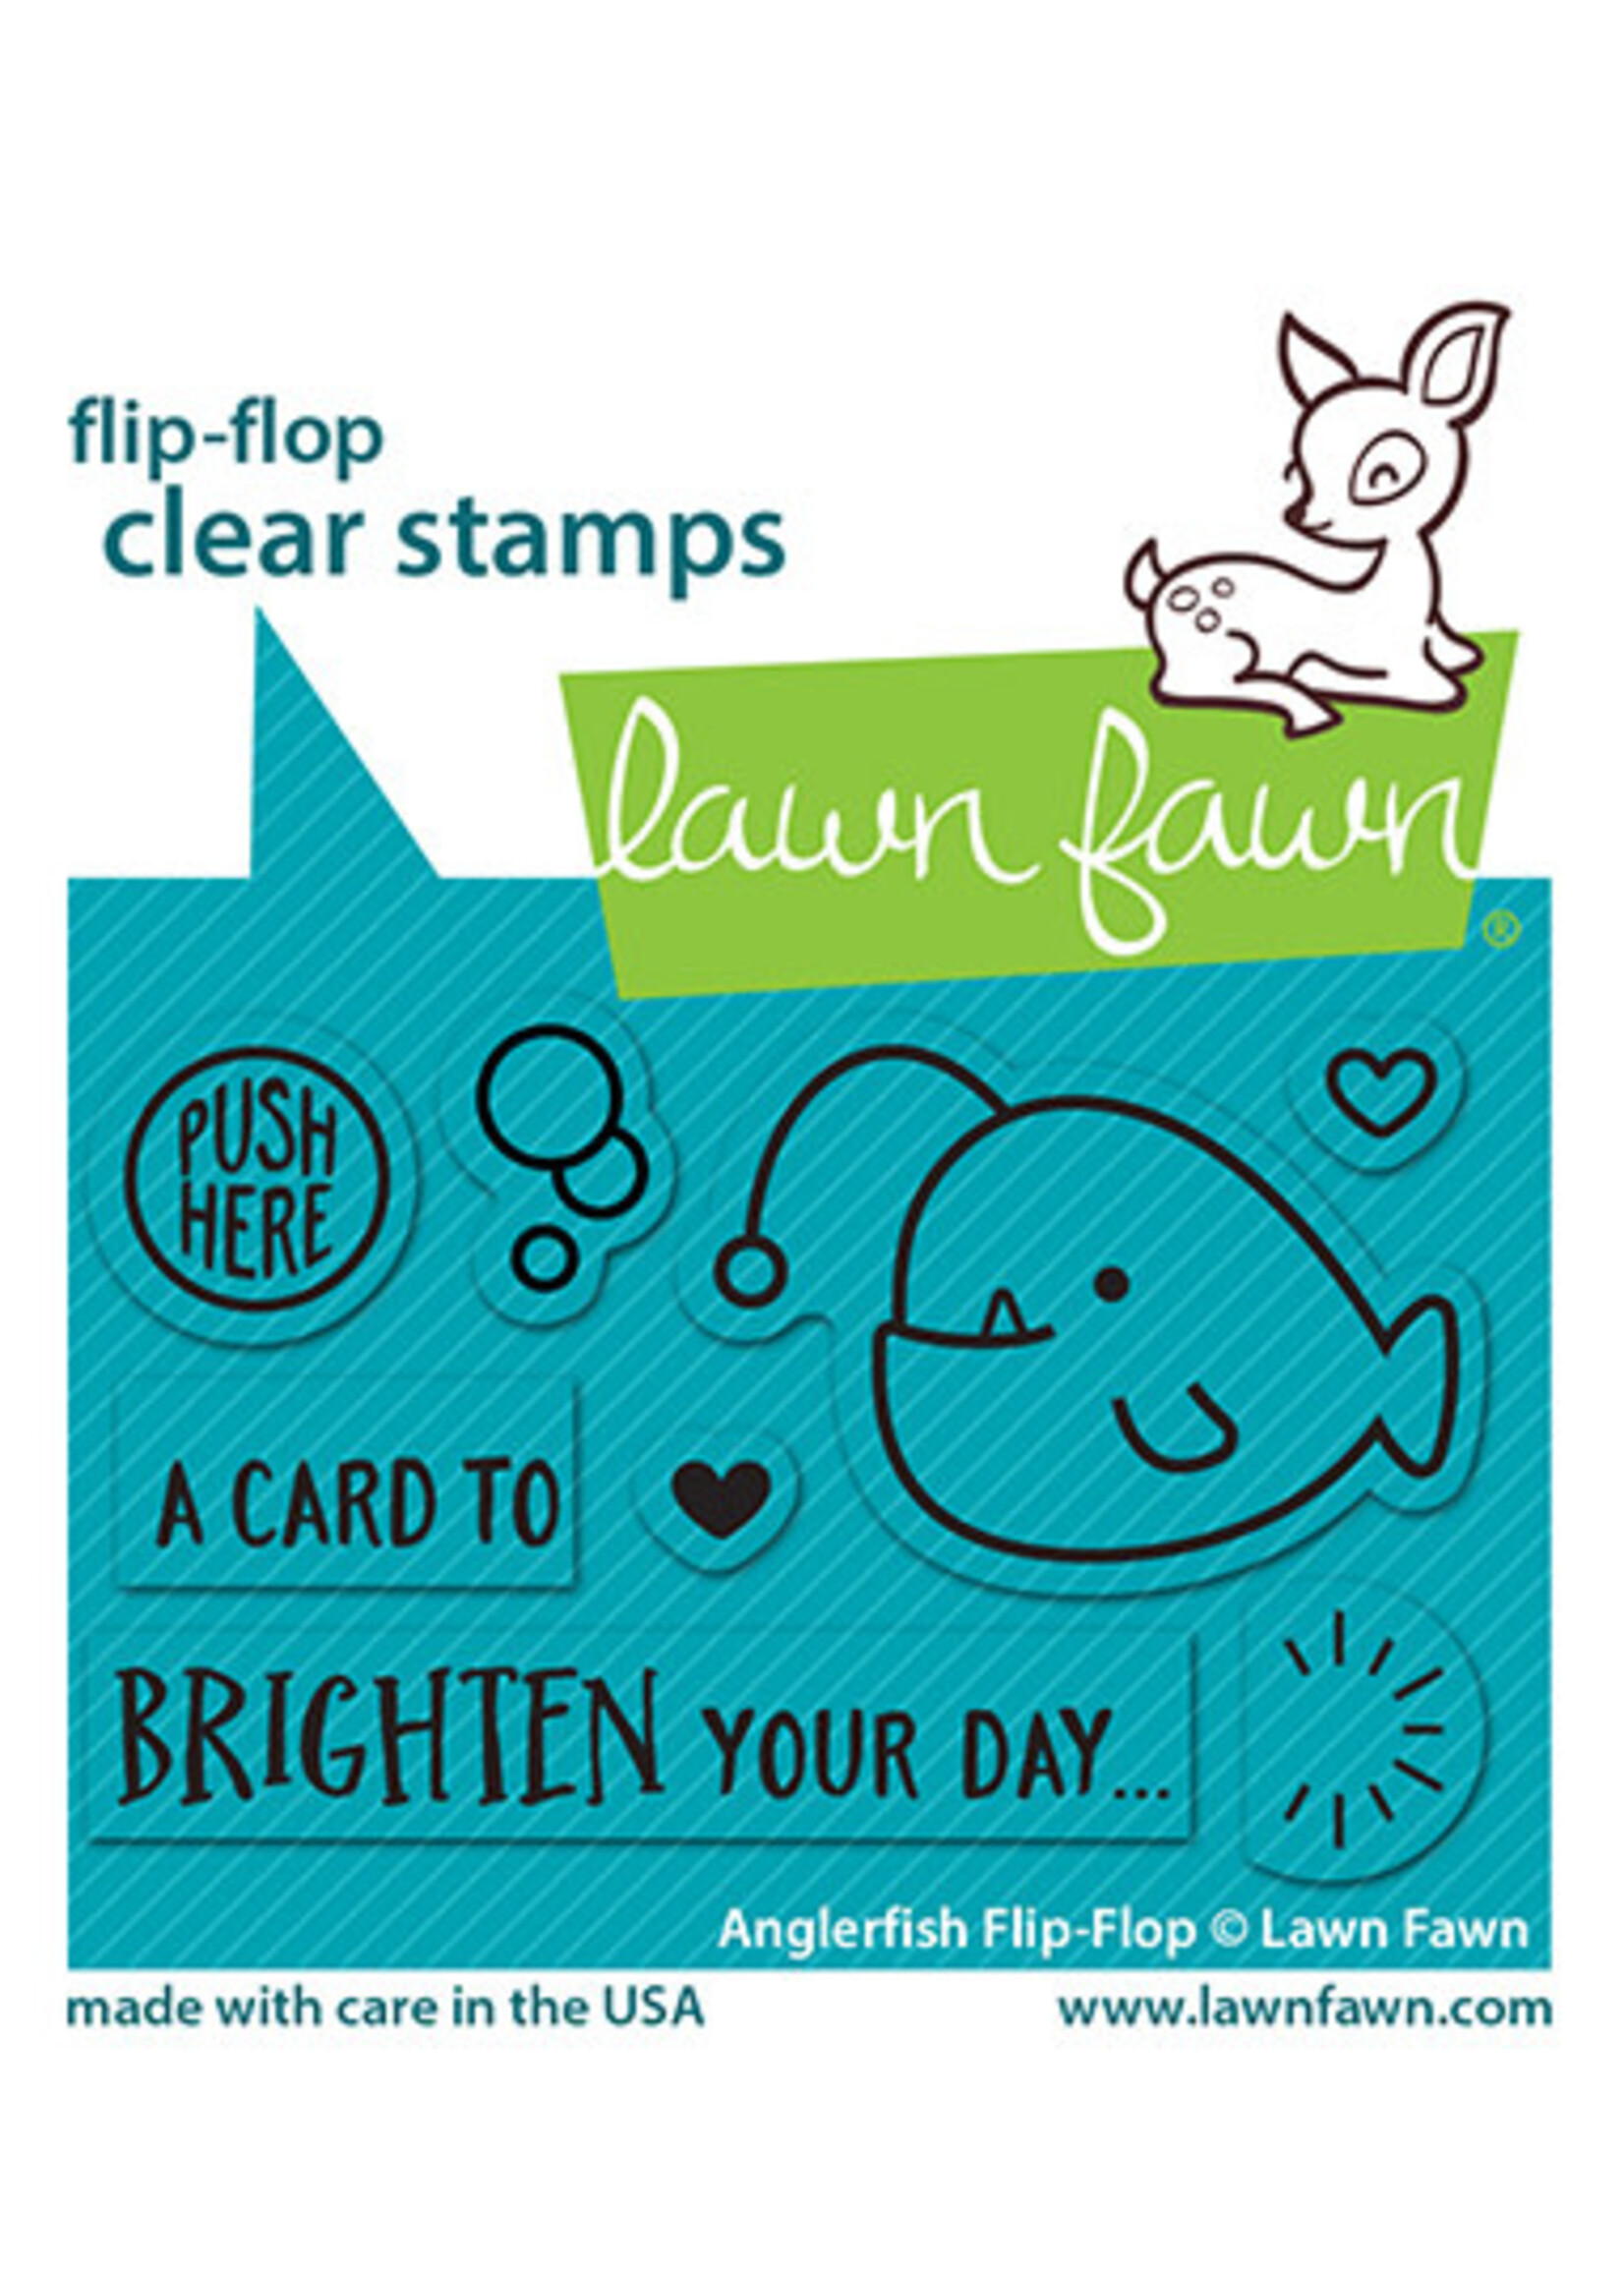 Lawn Fawn angler fish flip-flop stamp